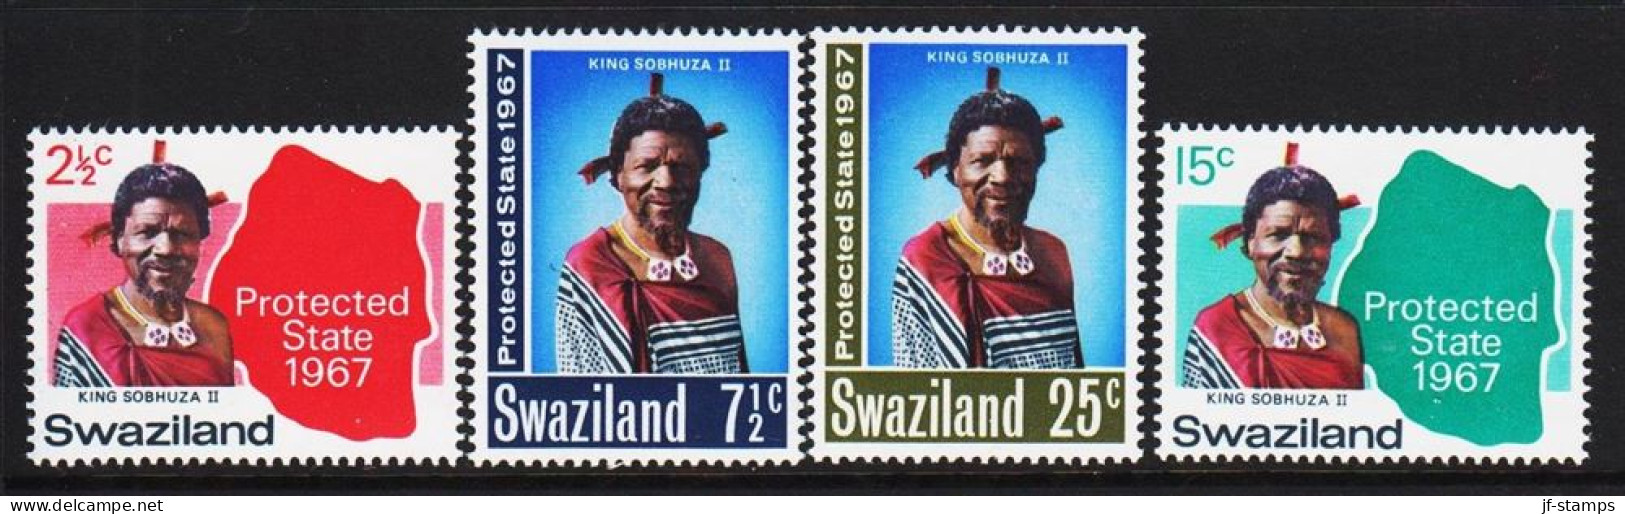 1967. SWAZILAND. Protected State Complete Set With 4 Stamps Never Hinged.  (MICHEL 126-129) - JF544939 - Swaziland (...-1967)